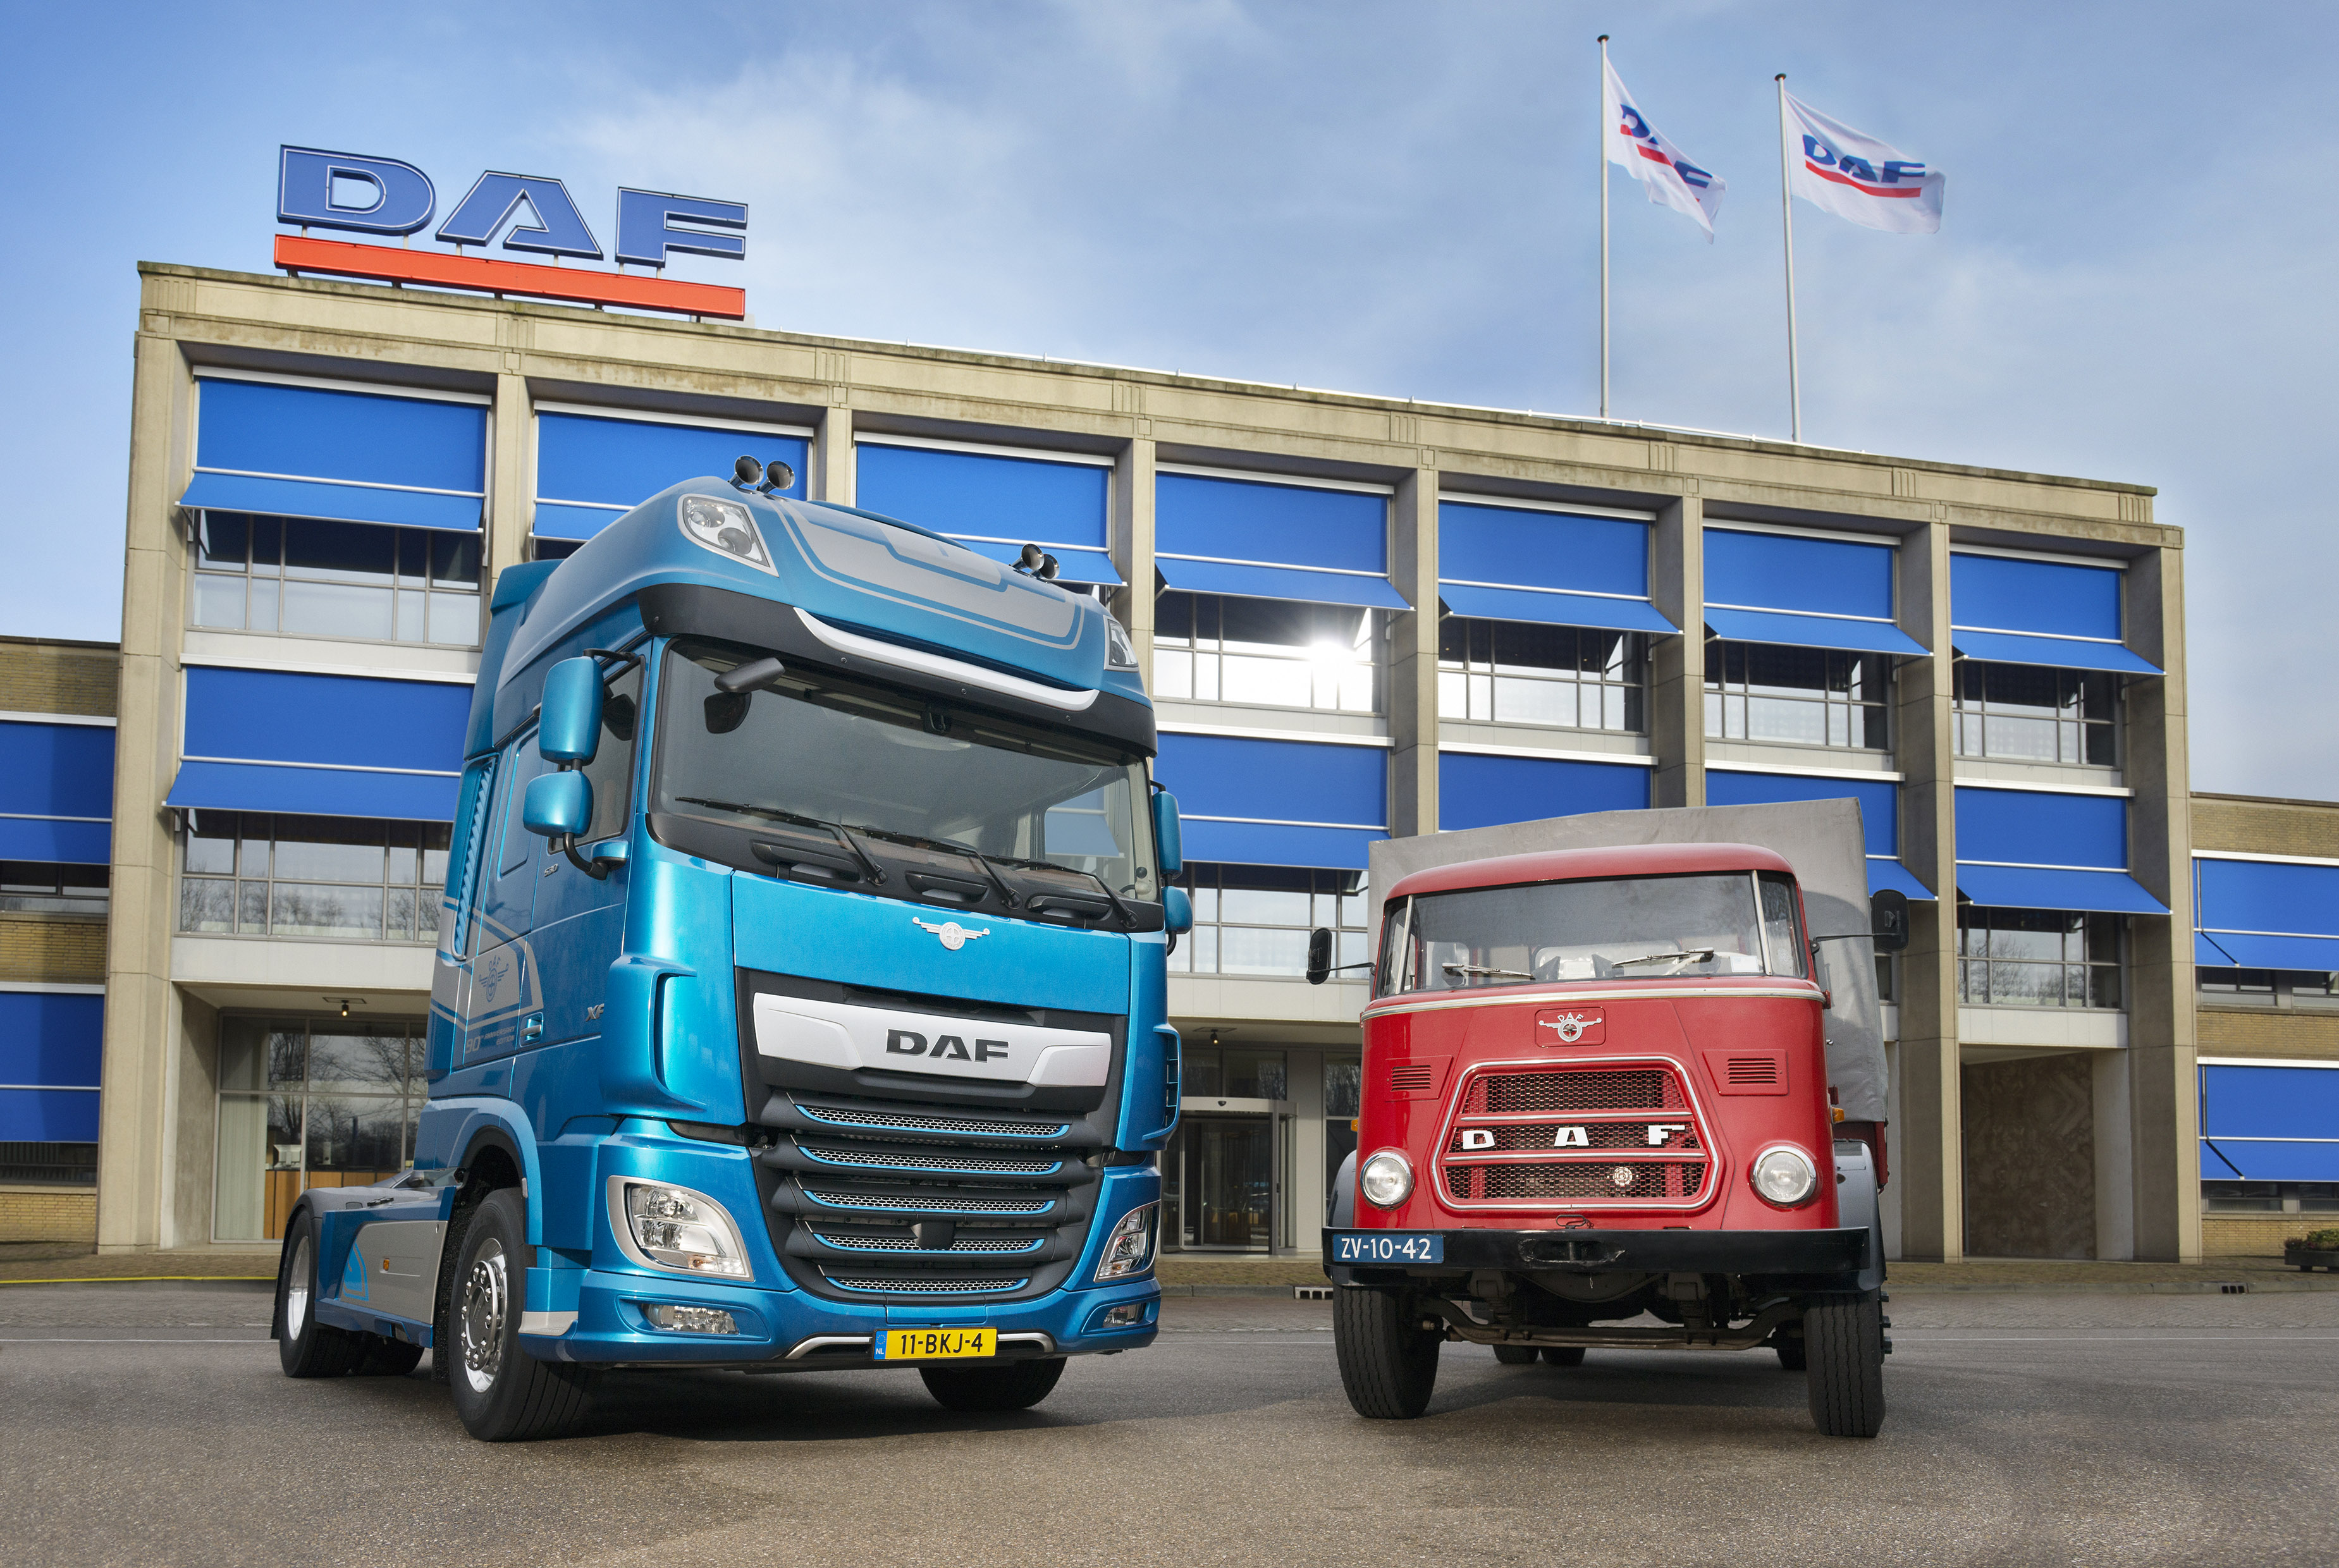 90 years of DAF